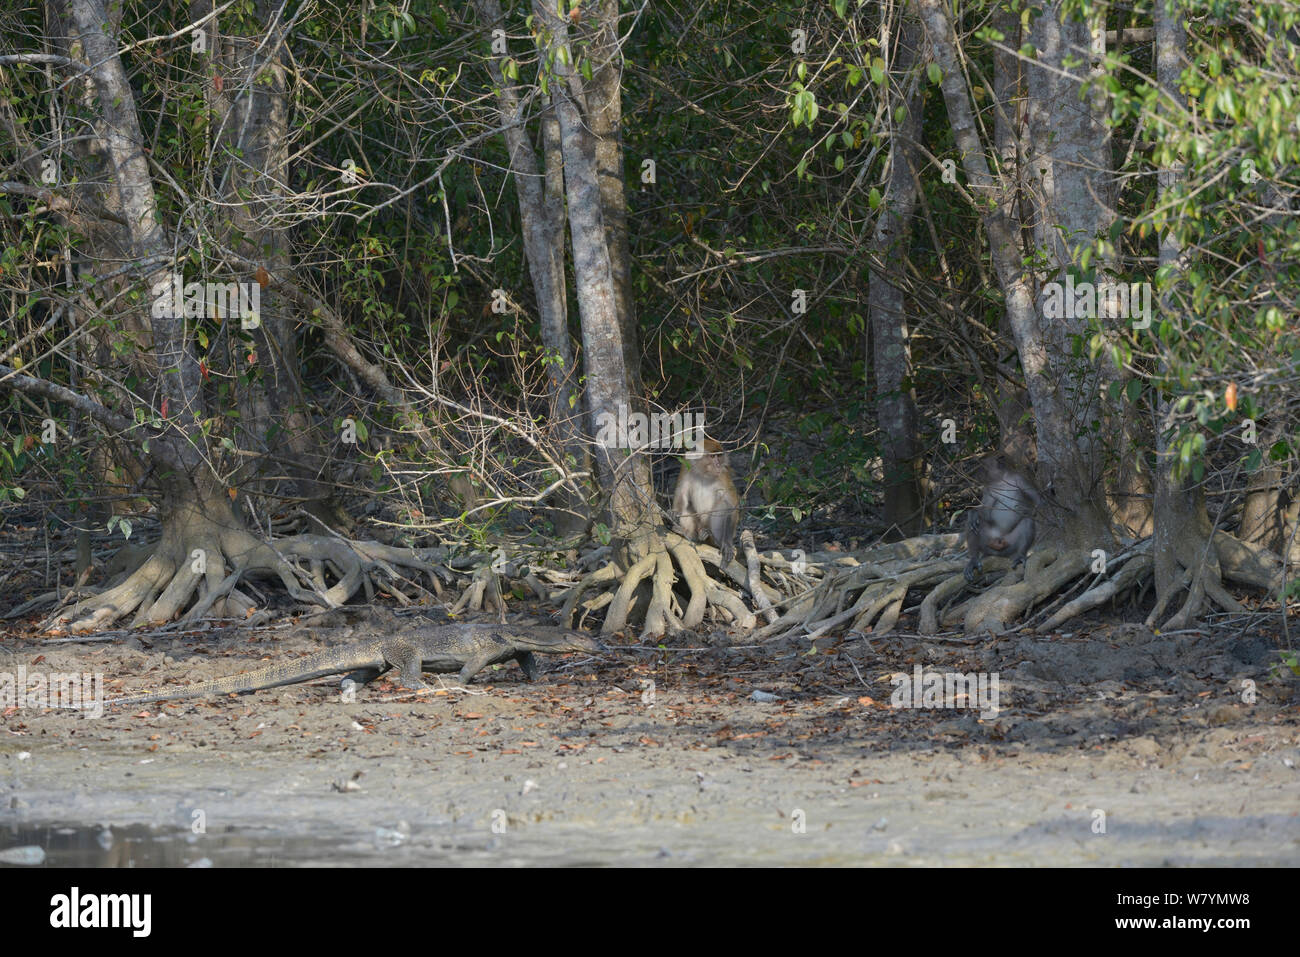 Crab-eating / Long-tailed macaque (Macaca fascicularis) and monitor lizard at forest edge, Kuala Selangor, Malaysia Stock Photo